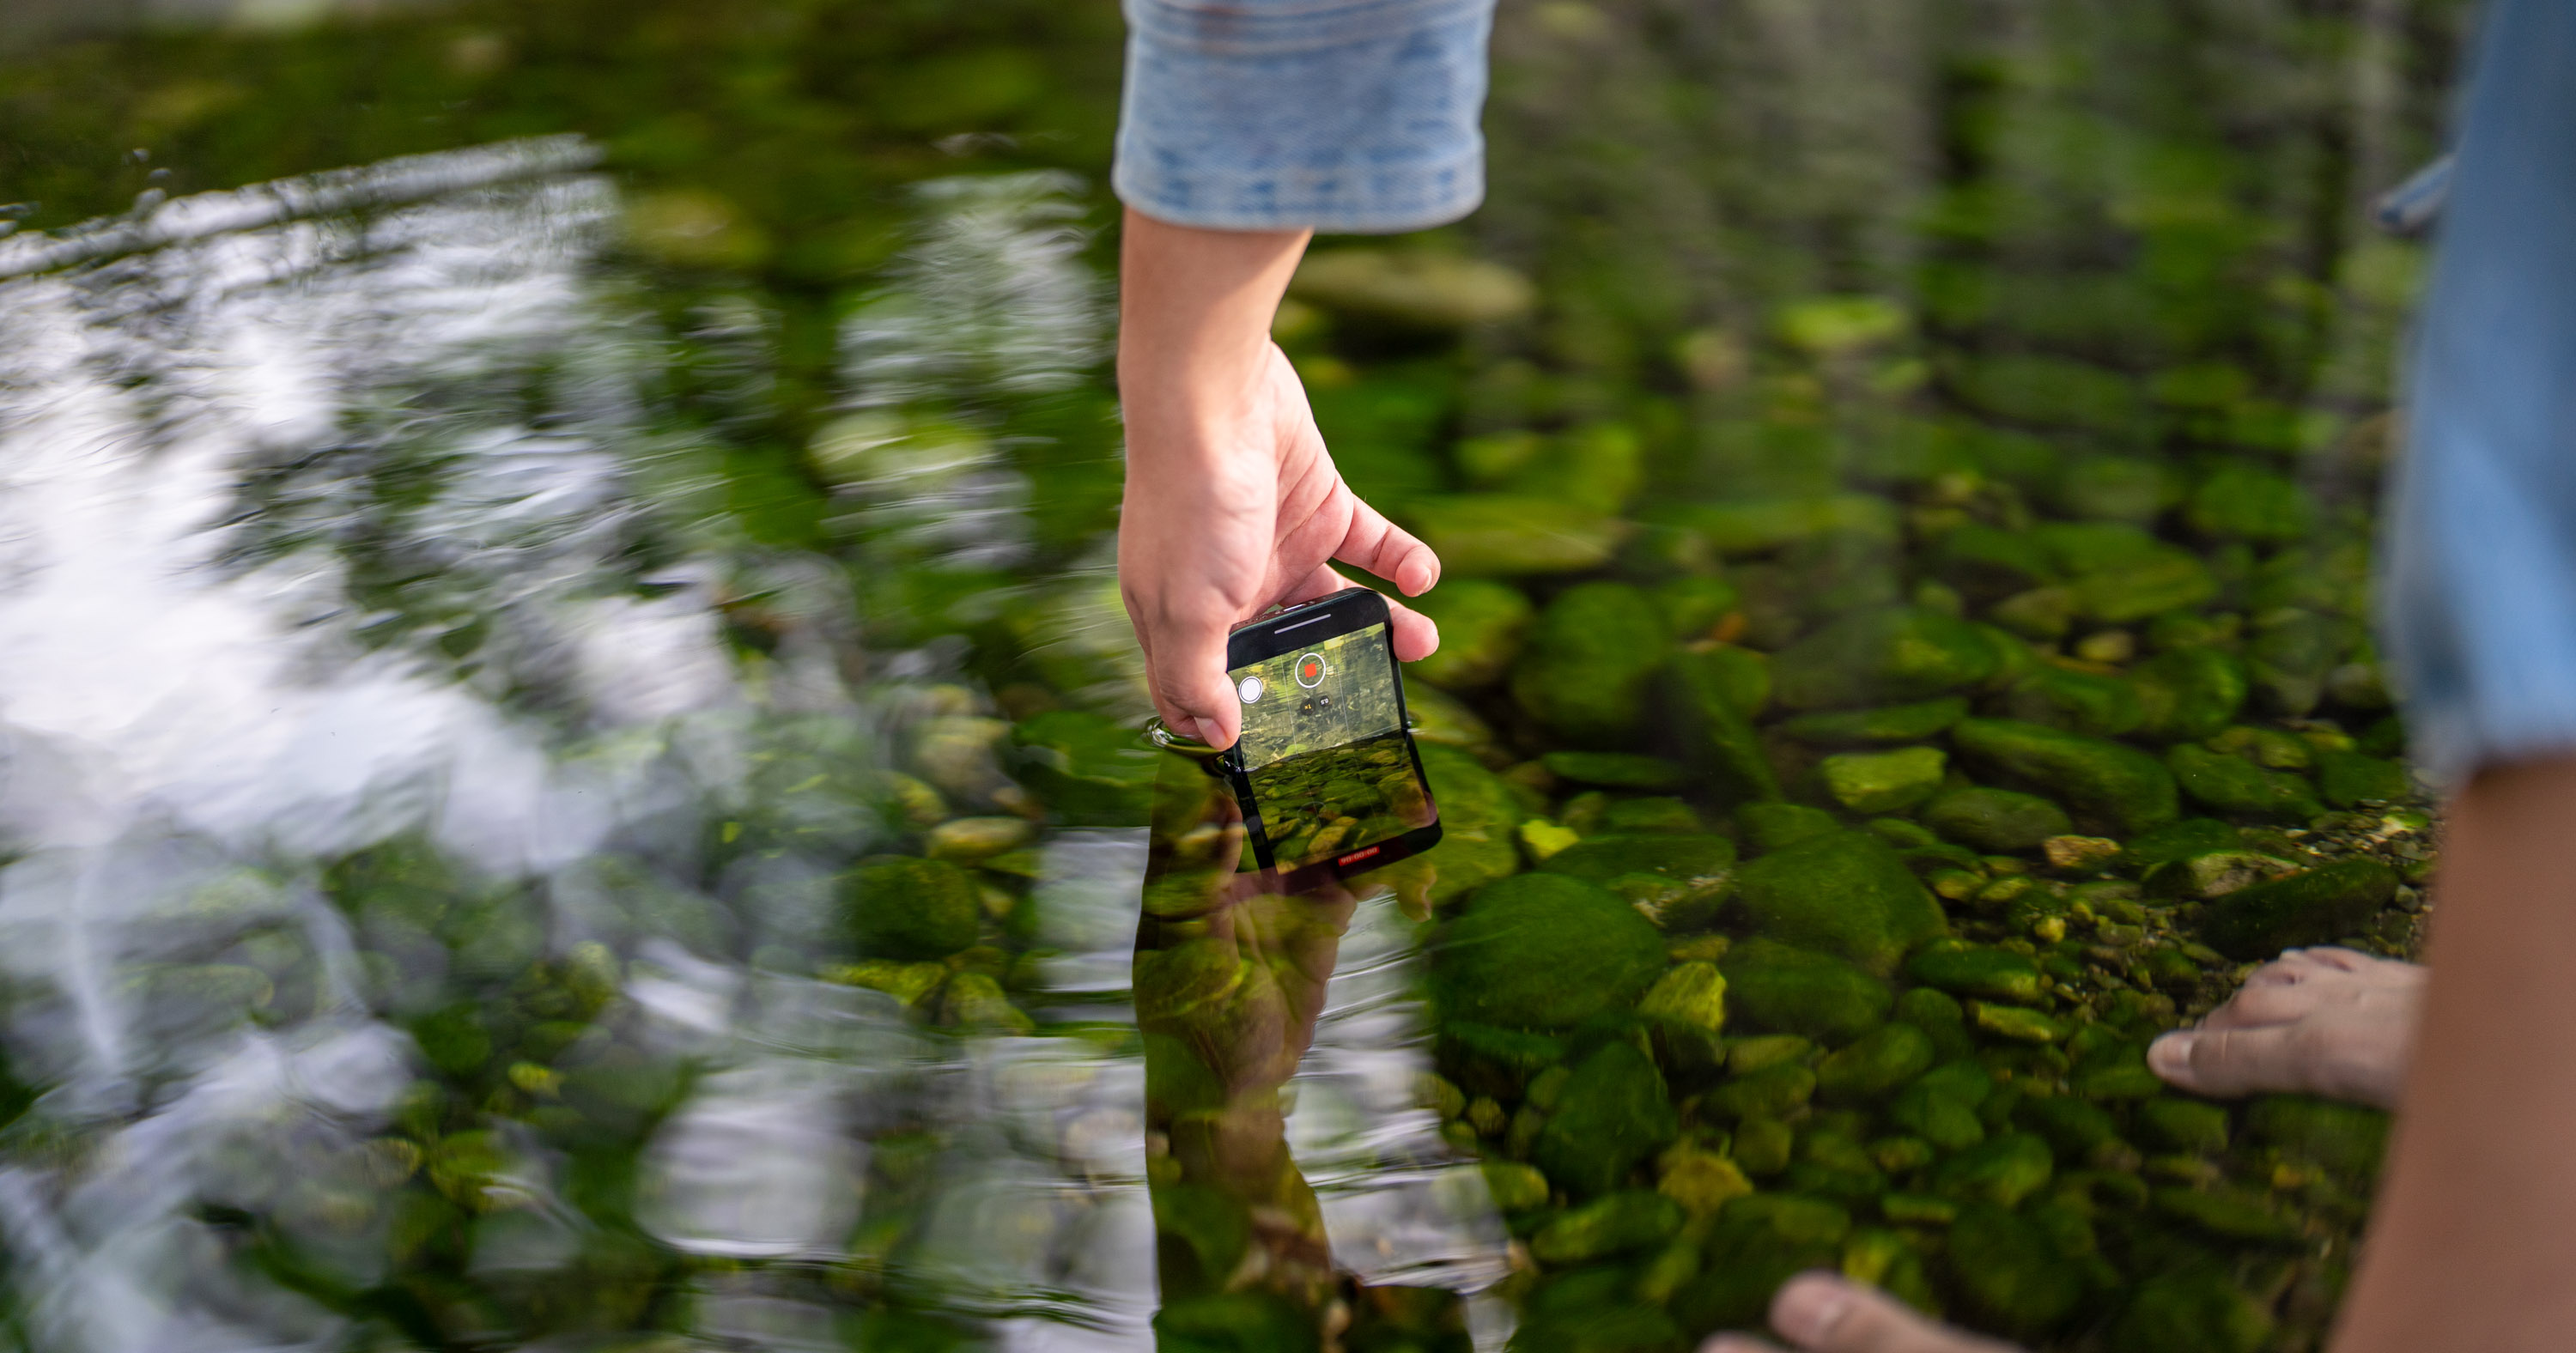 a hand submerging a cell phone into water